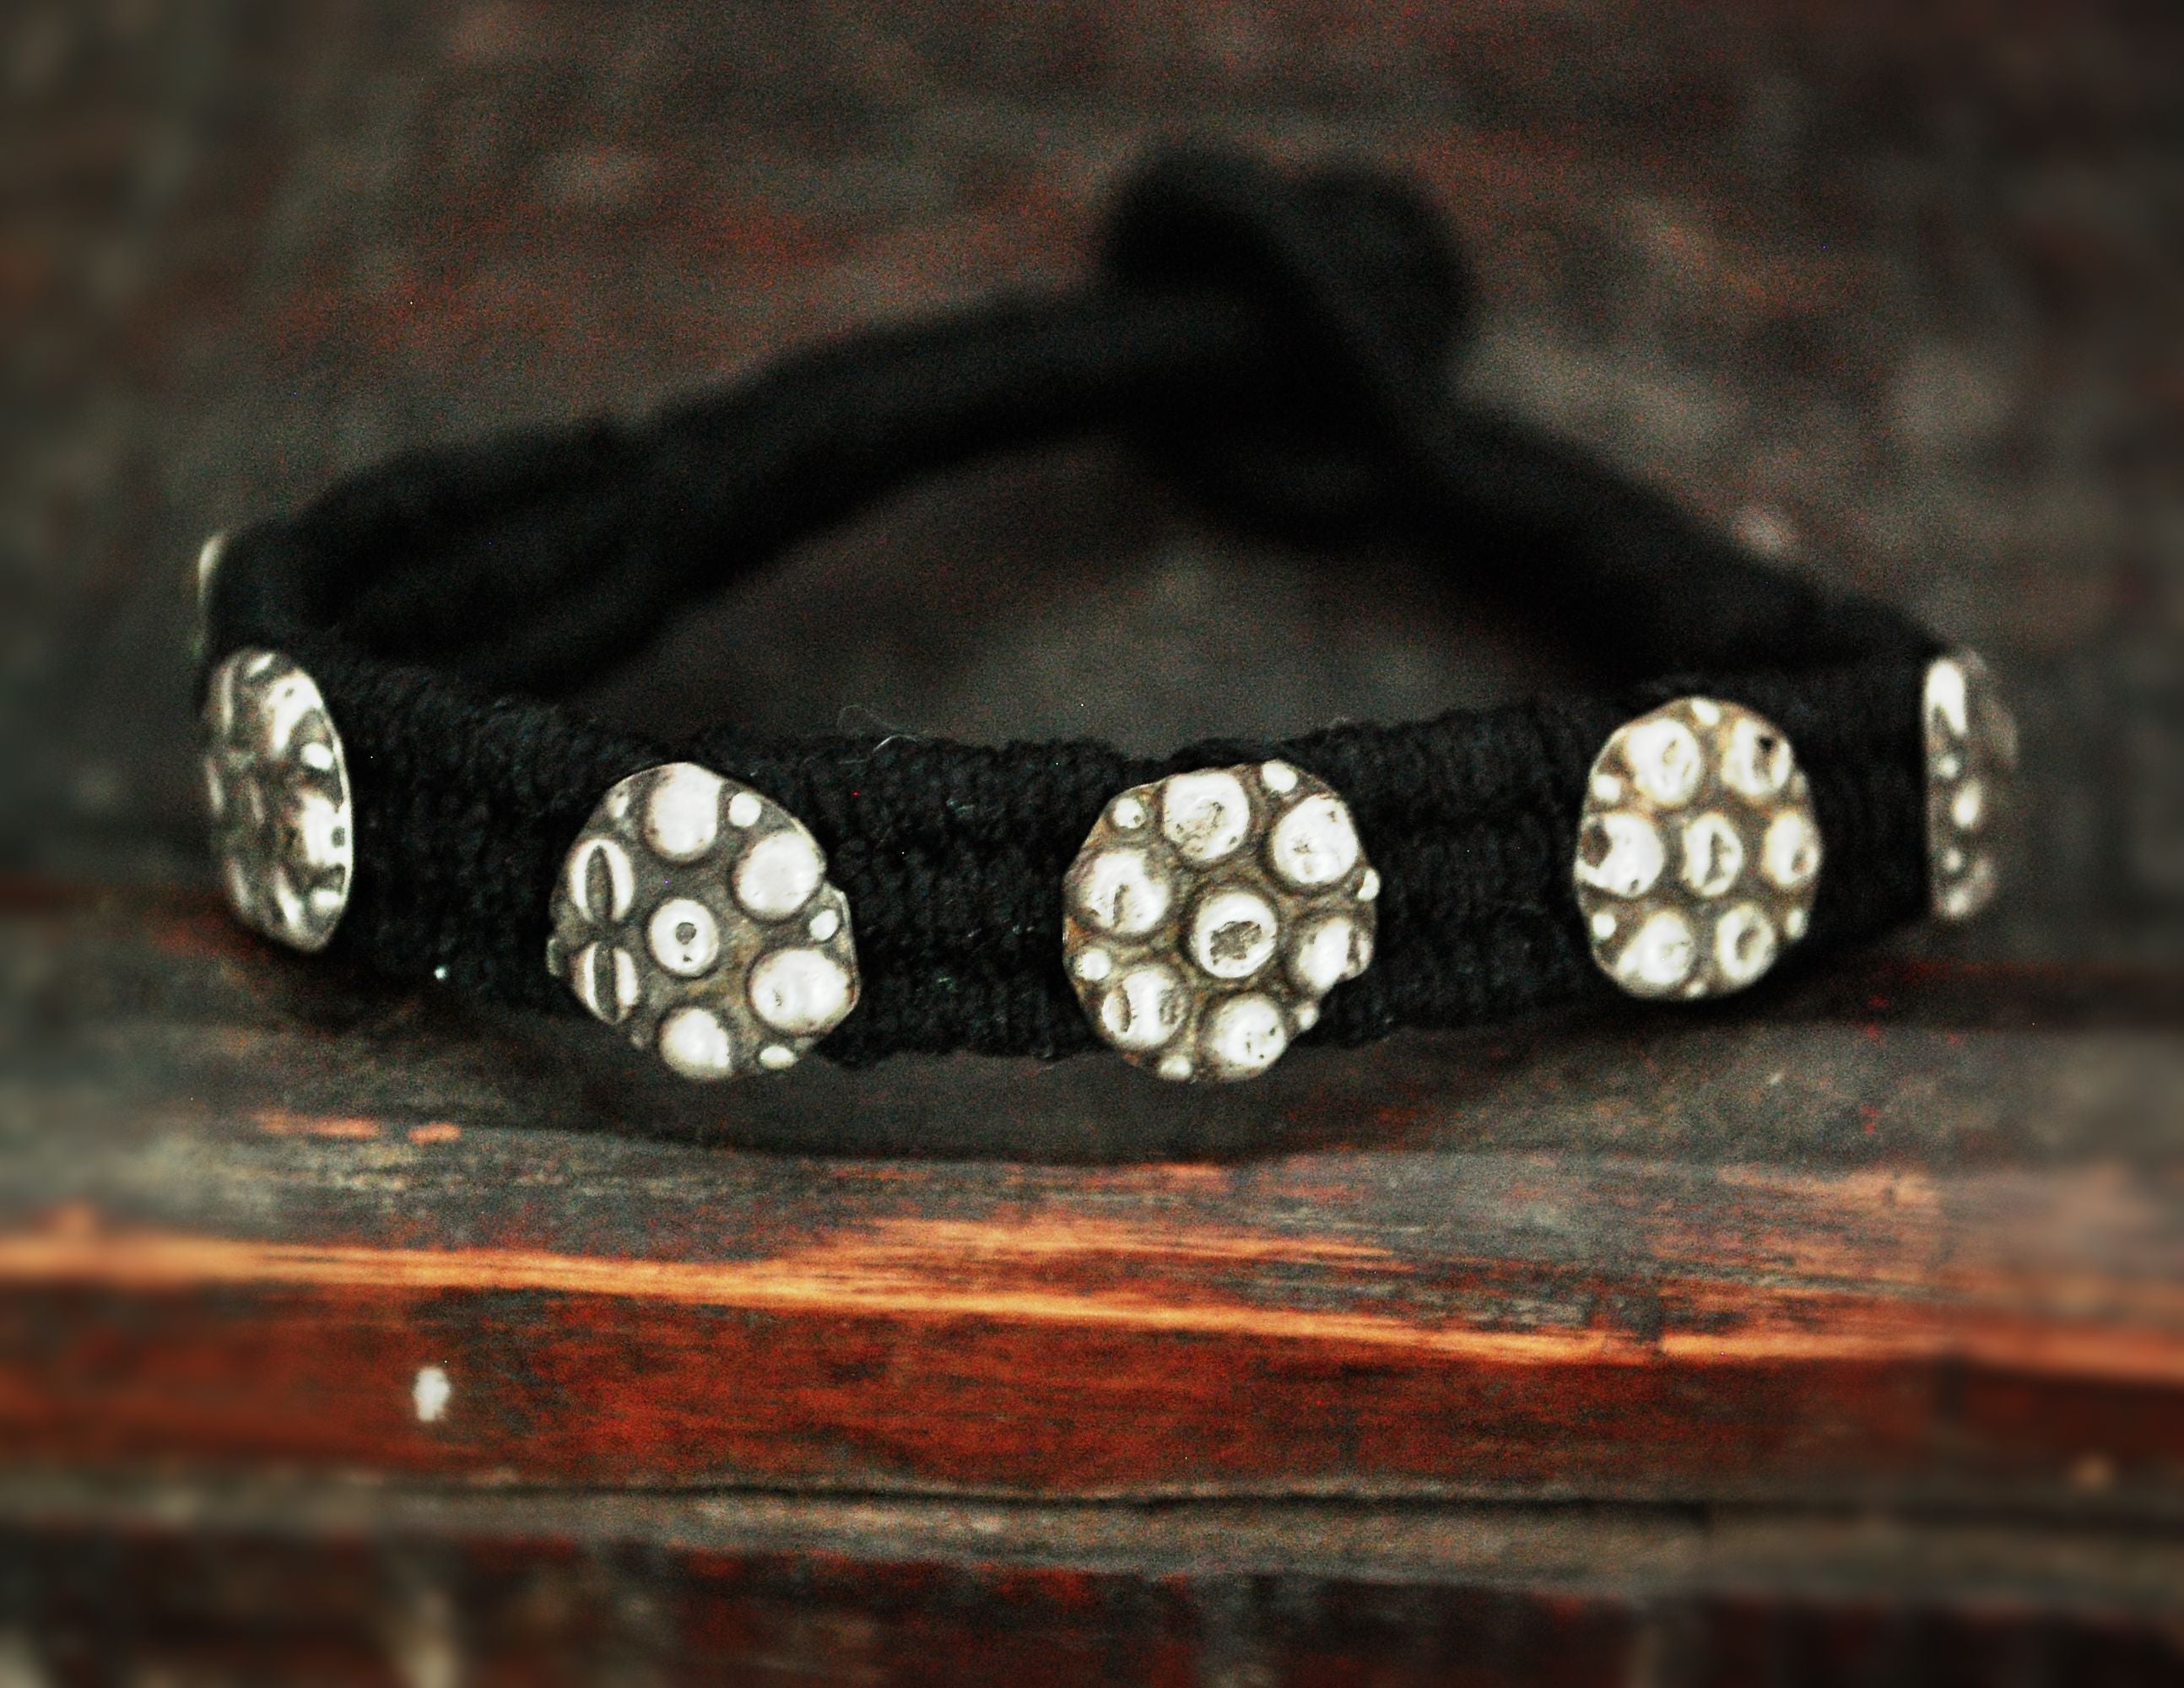 Tribal Rajasthani Cotton Bracelet with Silver Buttons